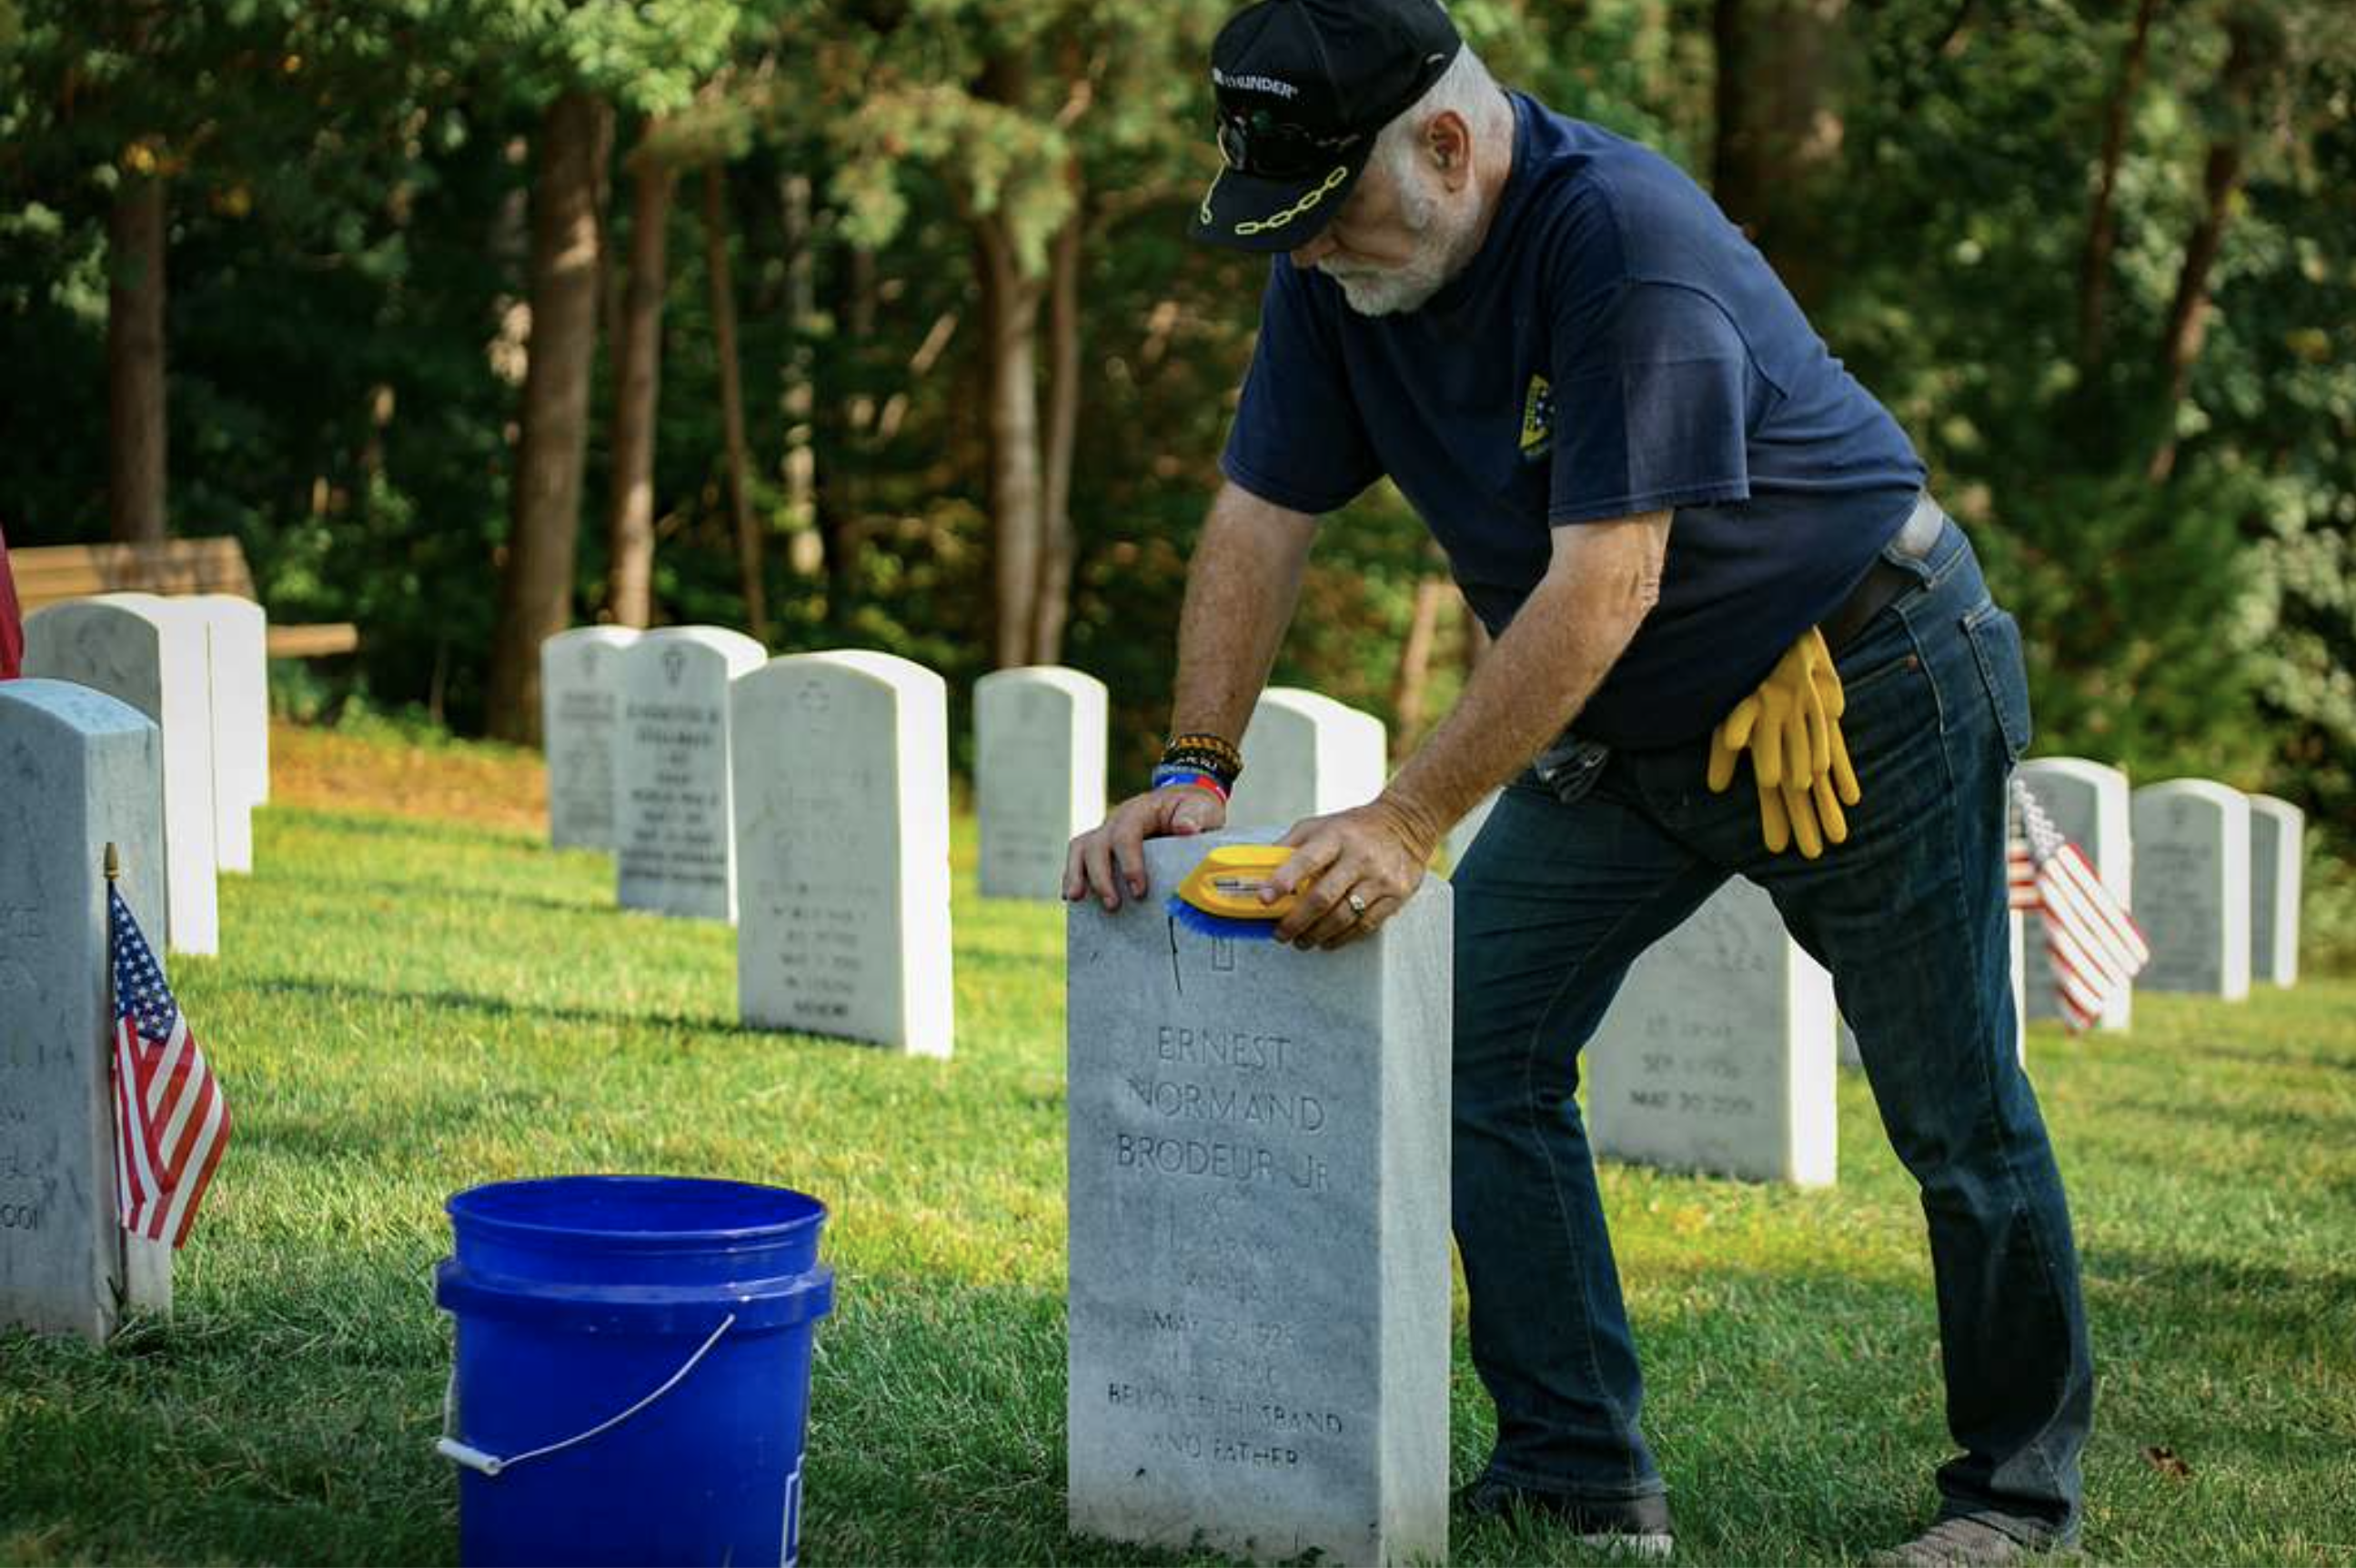 VA Commemorates September 11 Attacks with Volunteer Events At VA National Cemeteries To Honor Heroes